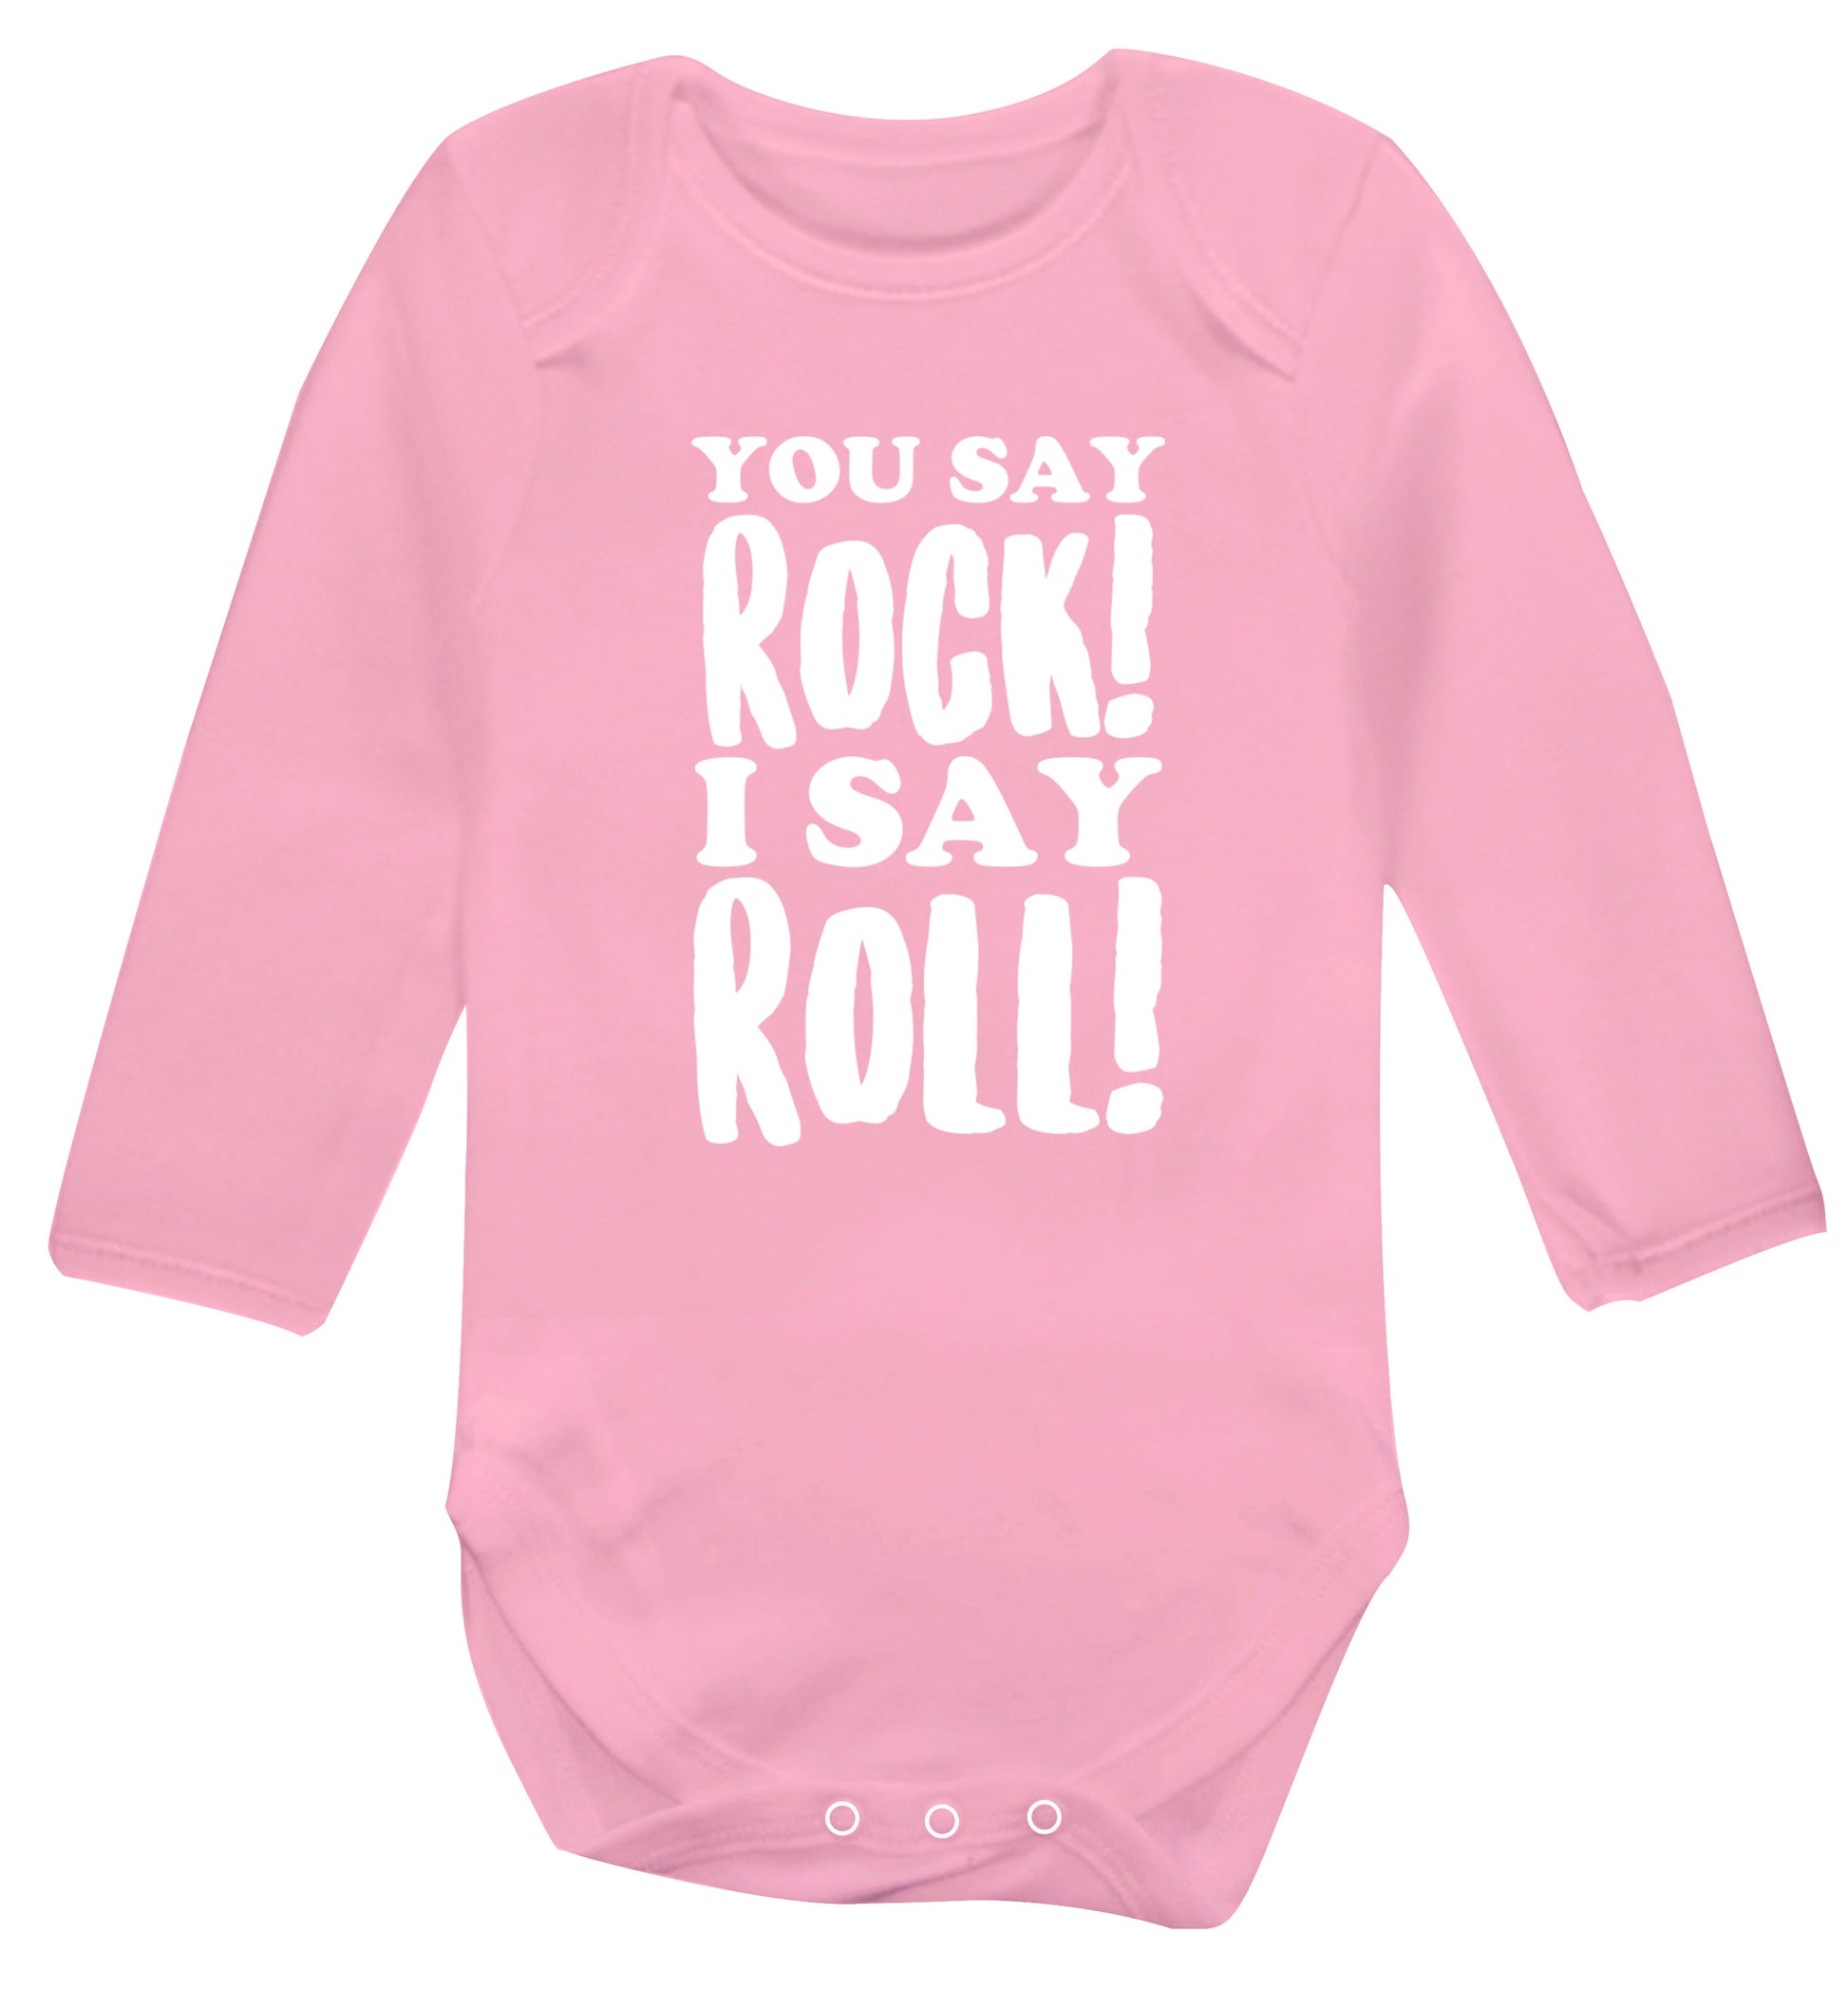 You say rock I say roll! Baby Vest long sleeved pale pink 6-12 months